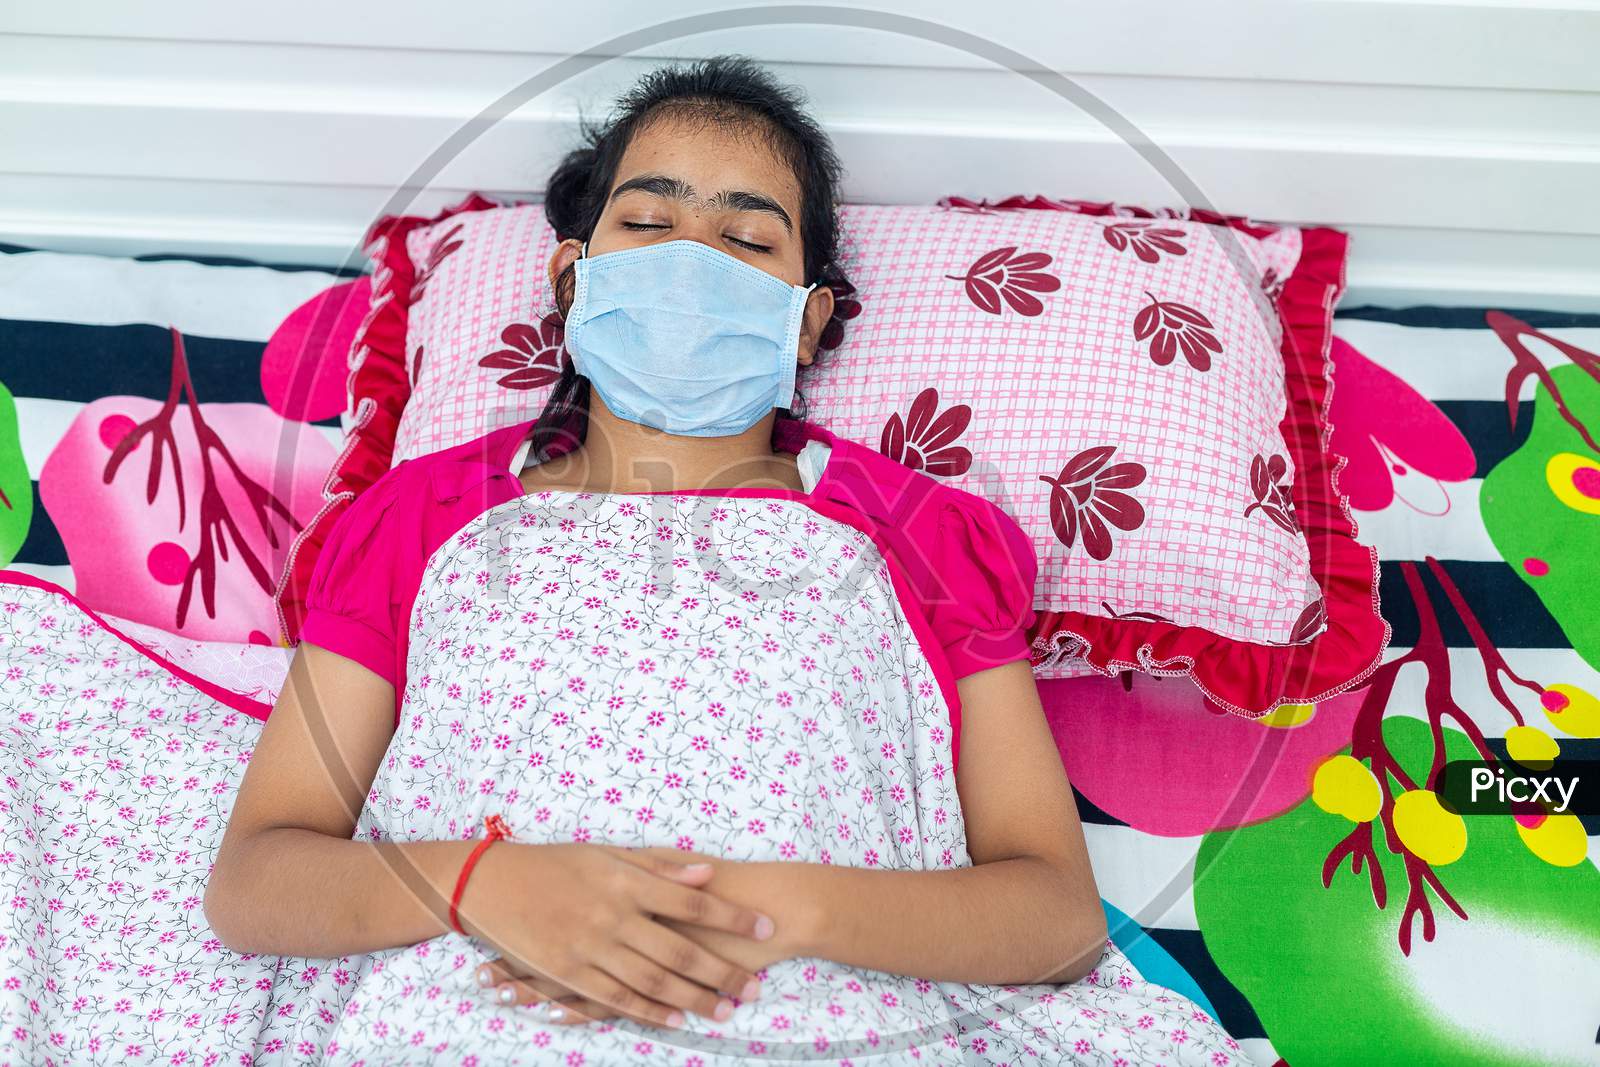 Young Brunette Girl With Covid-19 Lies In Bed At Home Wearing A Medical Mask. Quarantine Self-Isolation Concept